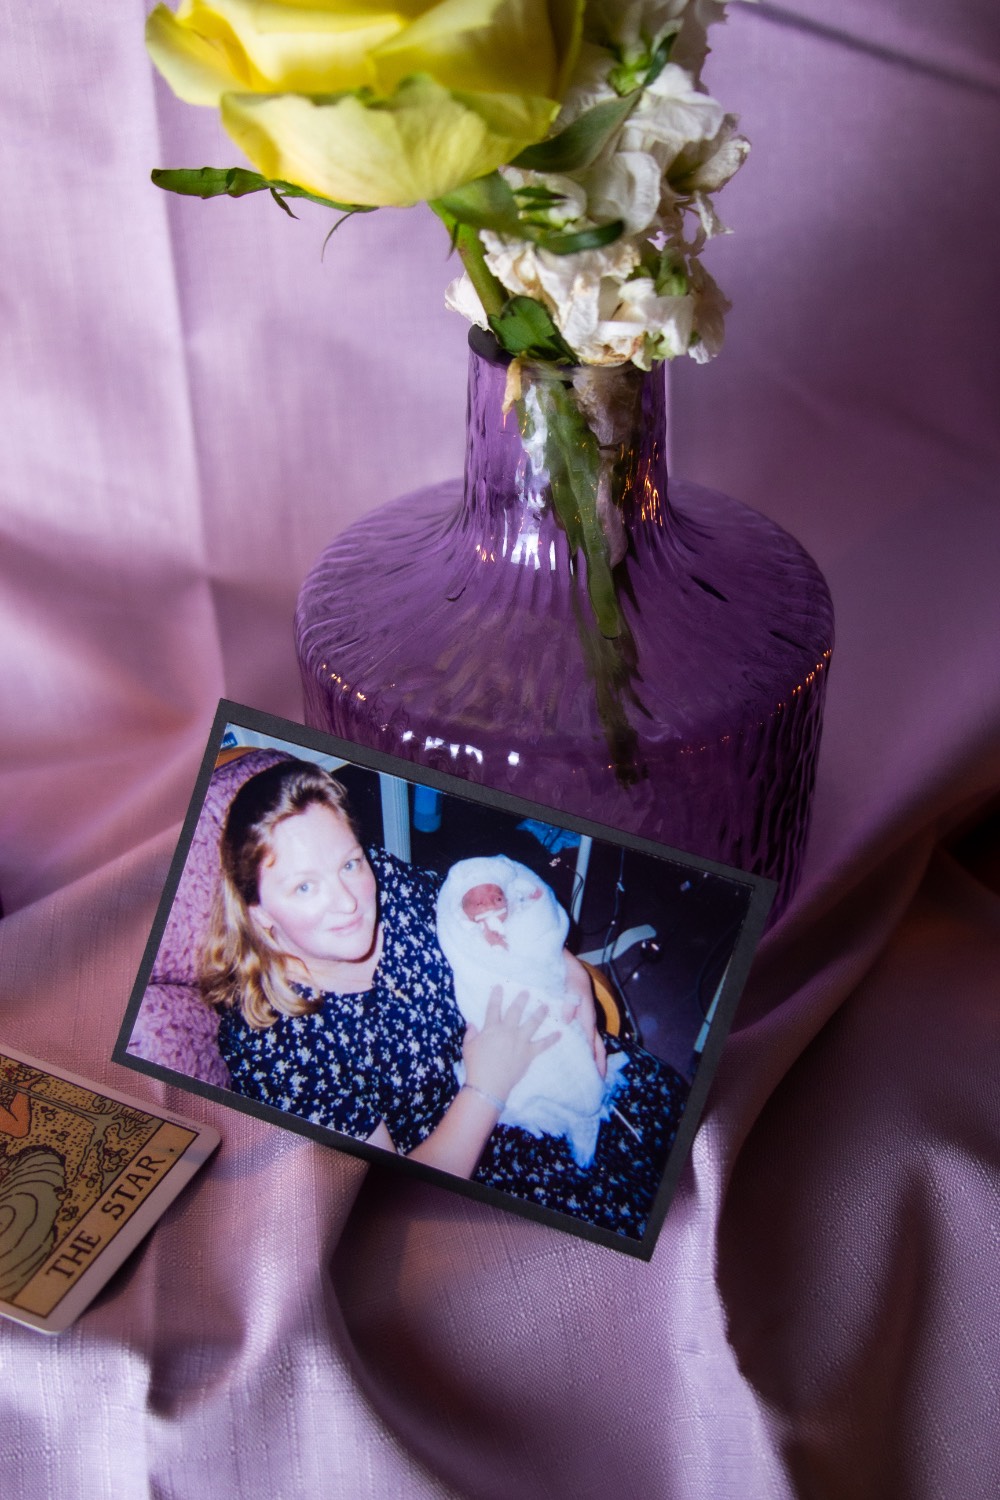 Photo of a photograph of a mother holding a baby. The photo sits on a purple cloth against a purple vase holding a yellow flower.